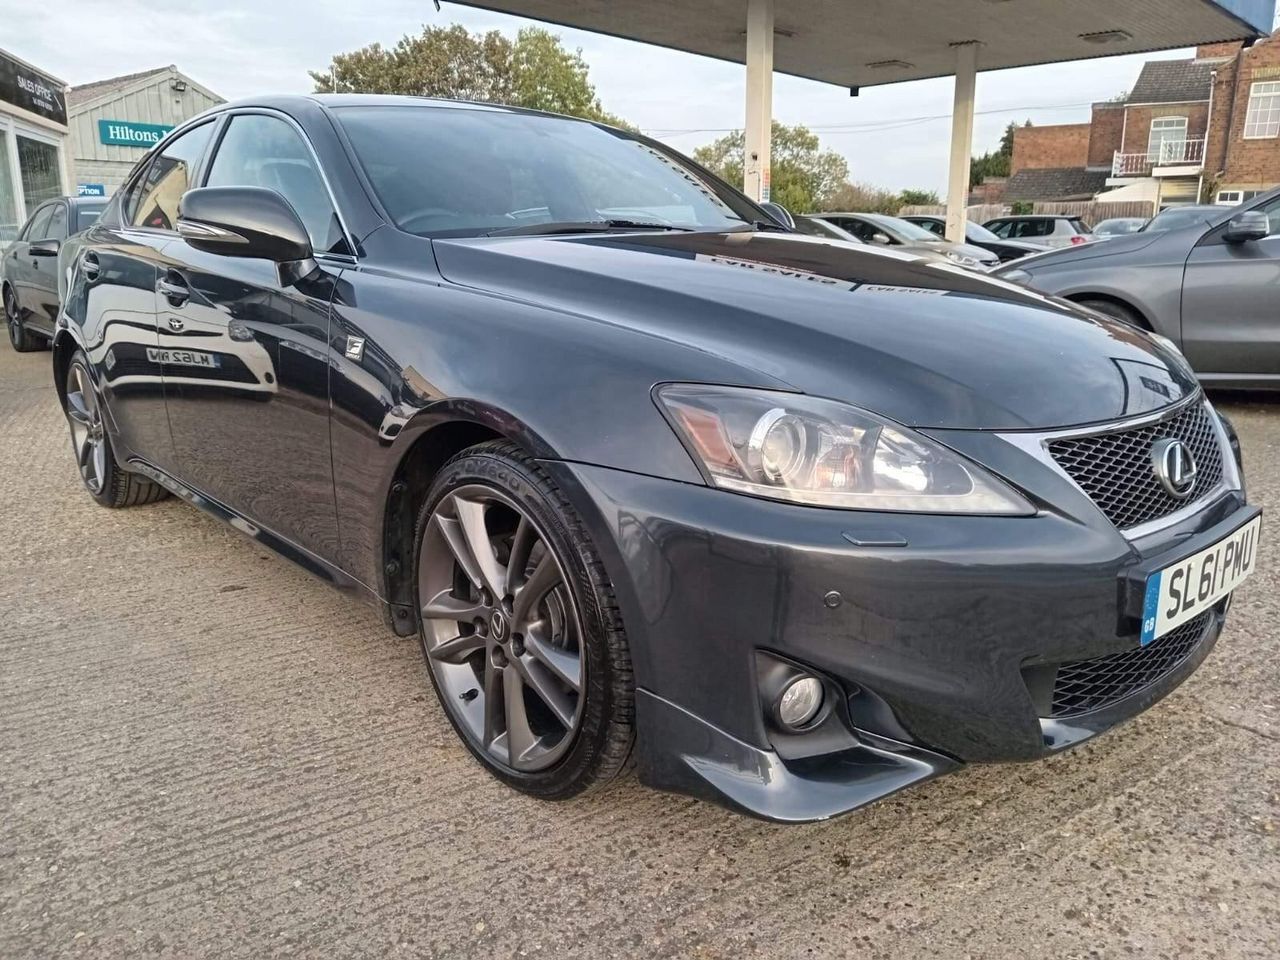 2011 Lexus IS 250 2.5 V6 F Sport Auto Euro 5 4dr - Picture 13 of 32